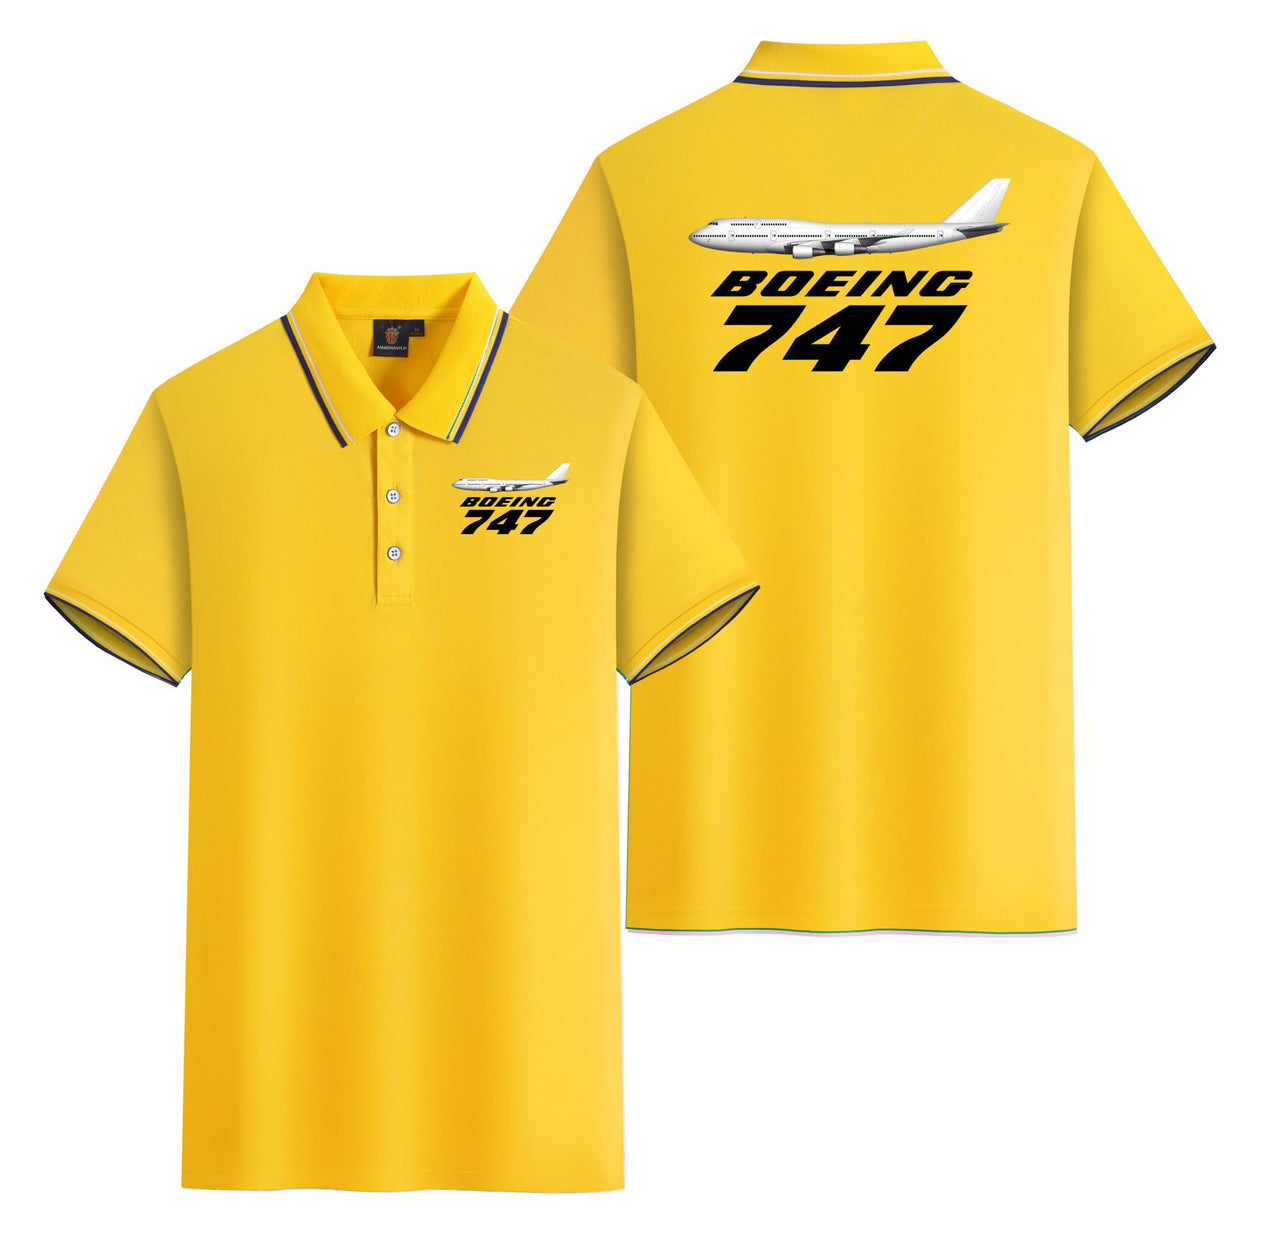 The Boeing 747 Designed Stylish Polo T-Shirts (Double-Side)